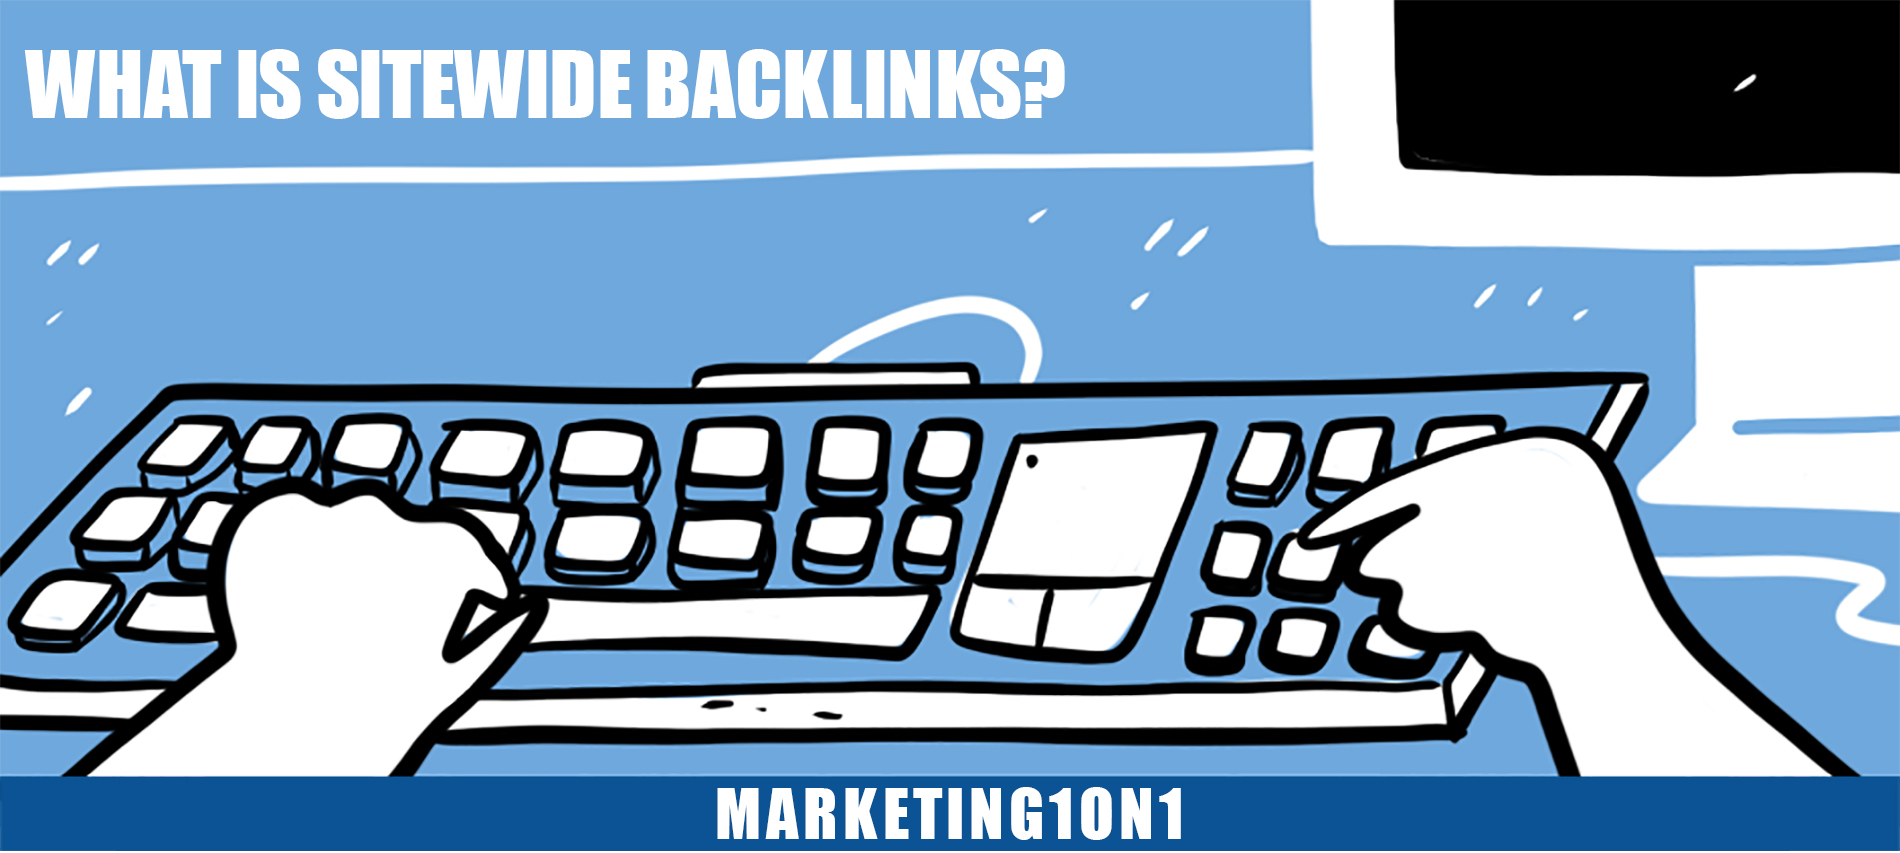 What is sitewide backlinks?